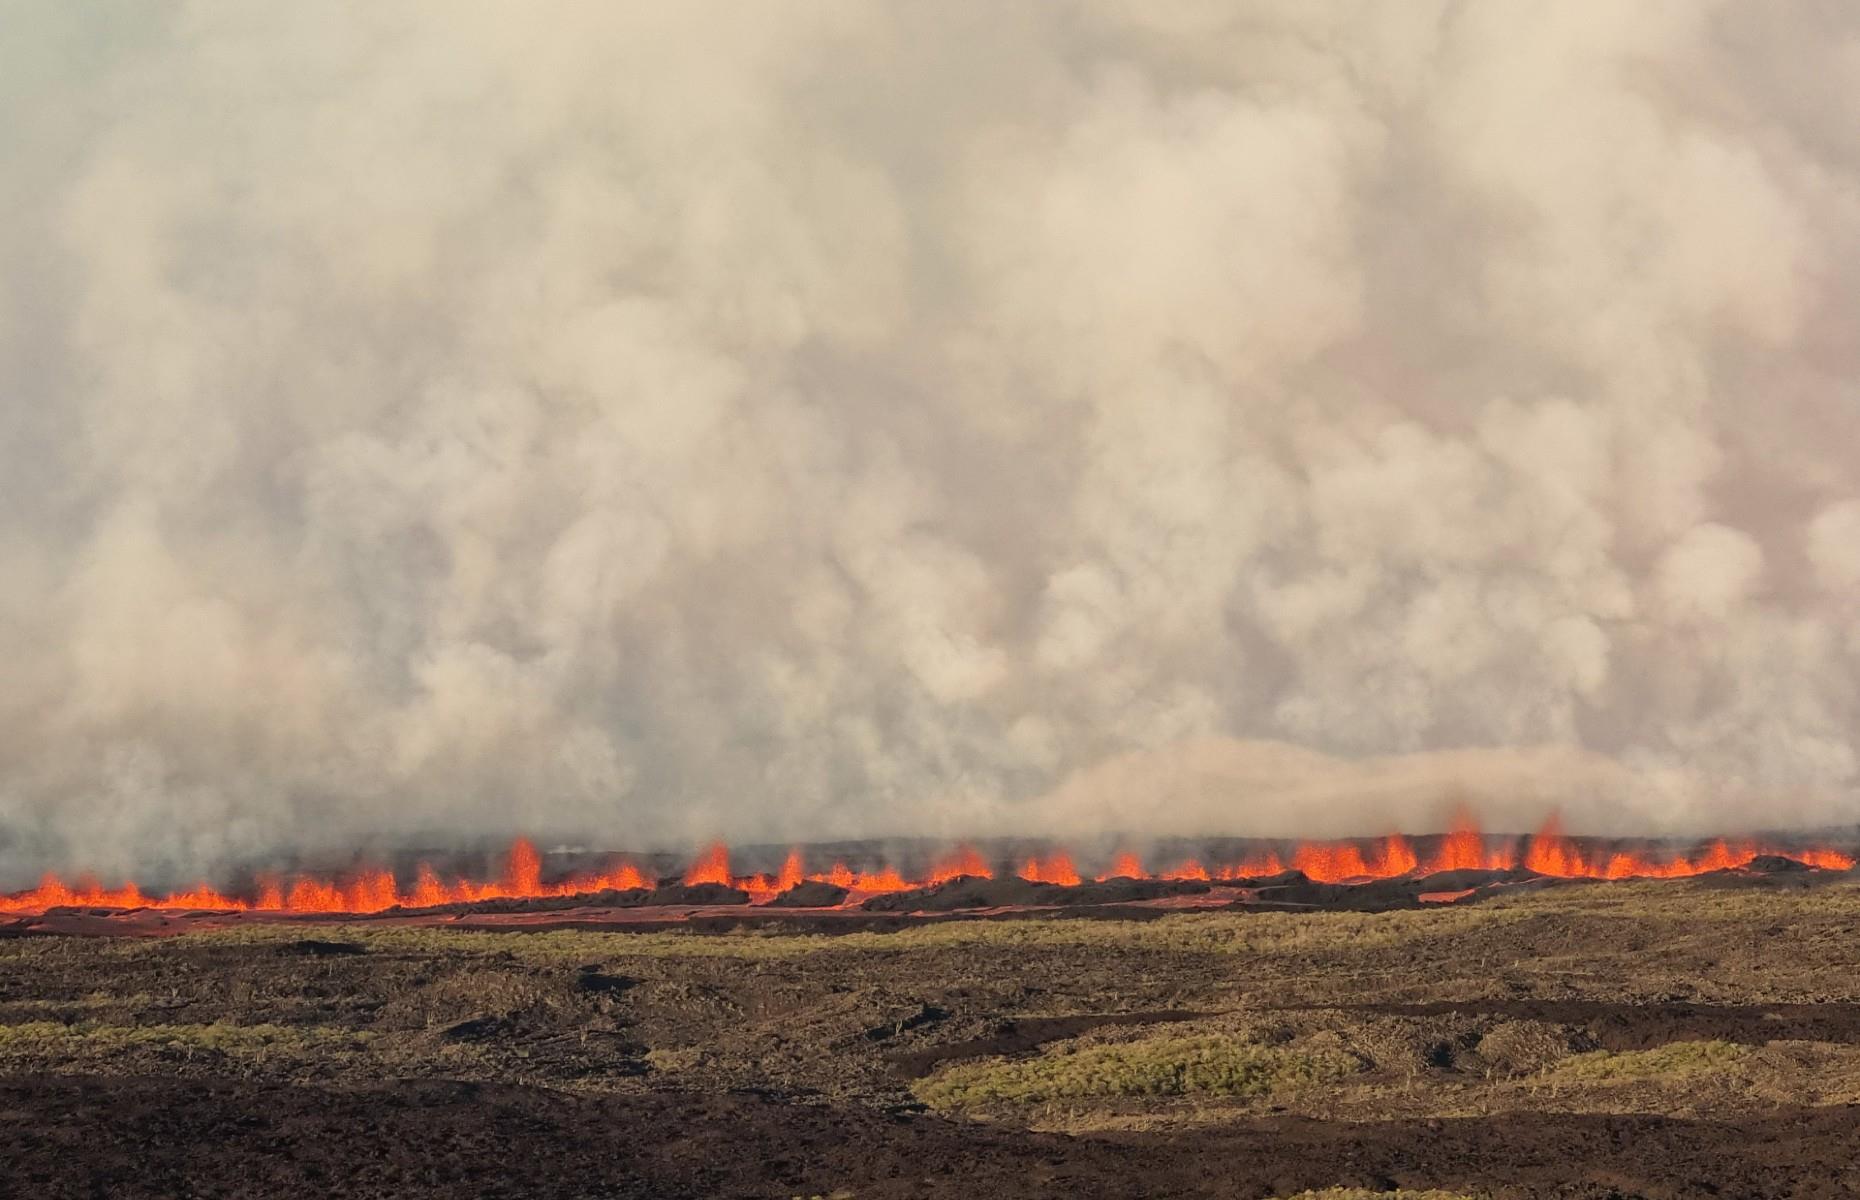 <p>After laying silent for more than three decades, in May 2015 the Galápagos’ Wolf Volcano sent clouds of ash and spewing lava into its surroundings. Luckily the Wolf Volcano is away from the main population center on the island and also the <a href="https://www.nasa.gov/image-feature/eruption-of-wolf-volcano-galapagos-islands">lava flowed east and southeast</a> rather than down the north slope, which is home to rare pink iguanas and giant tortoise.</p>